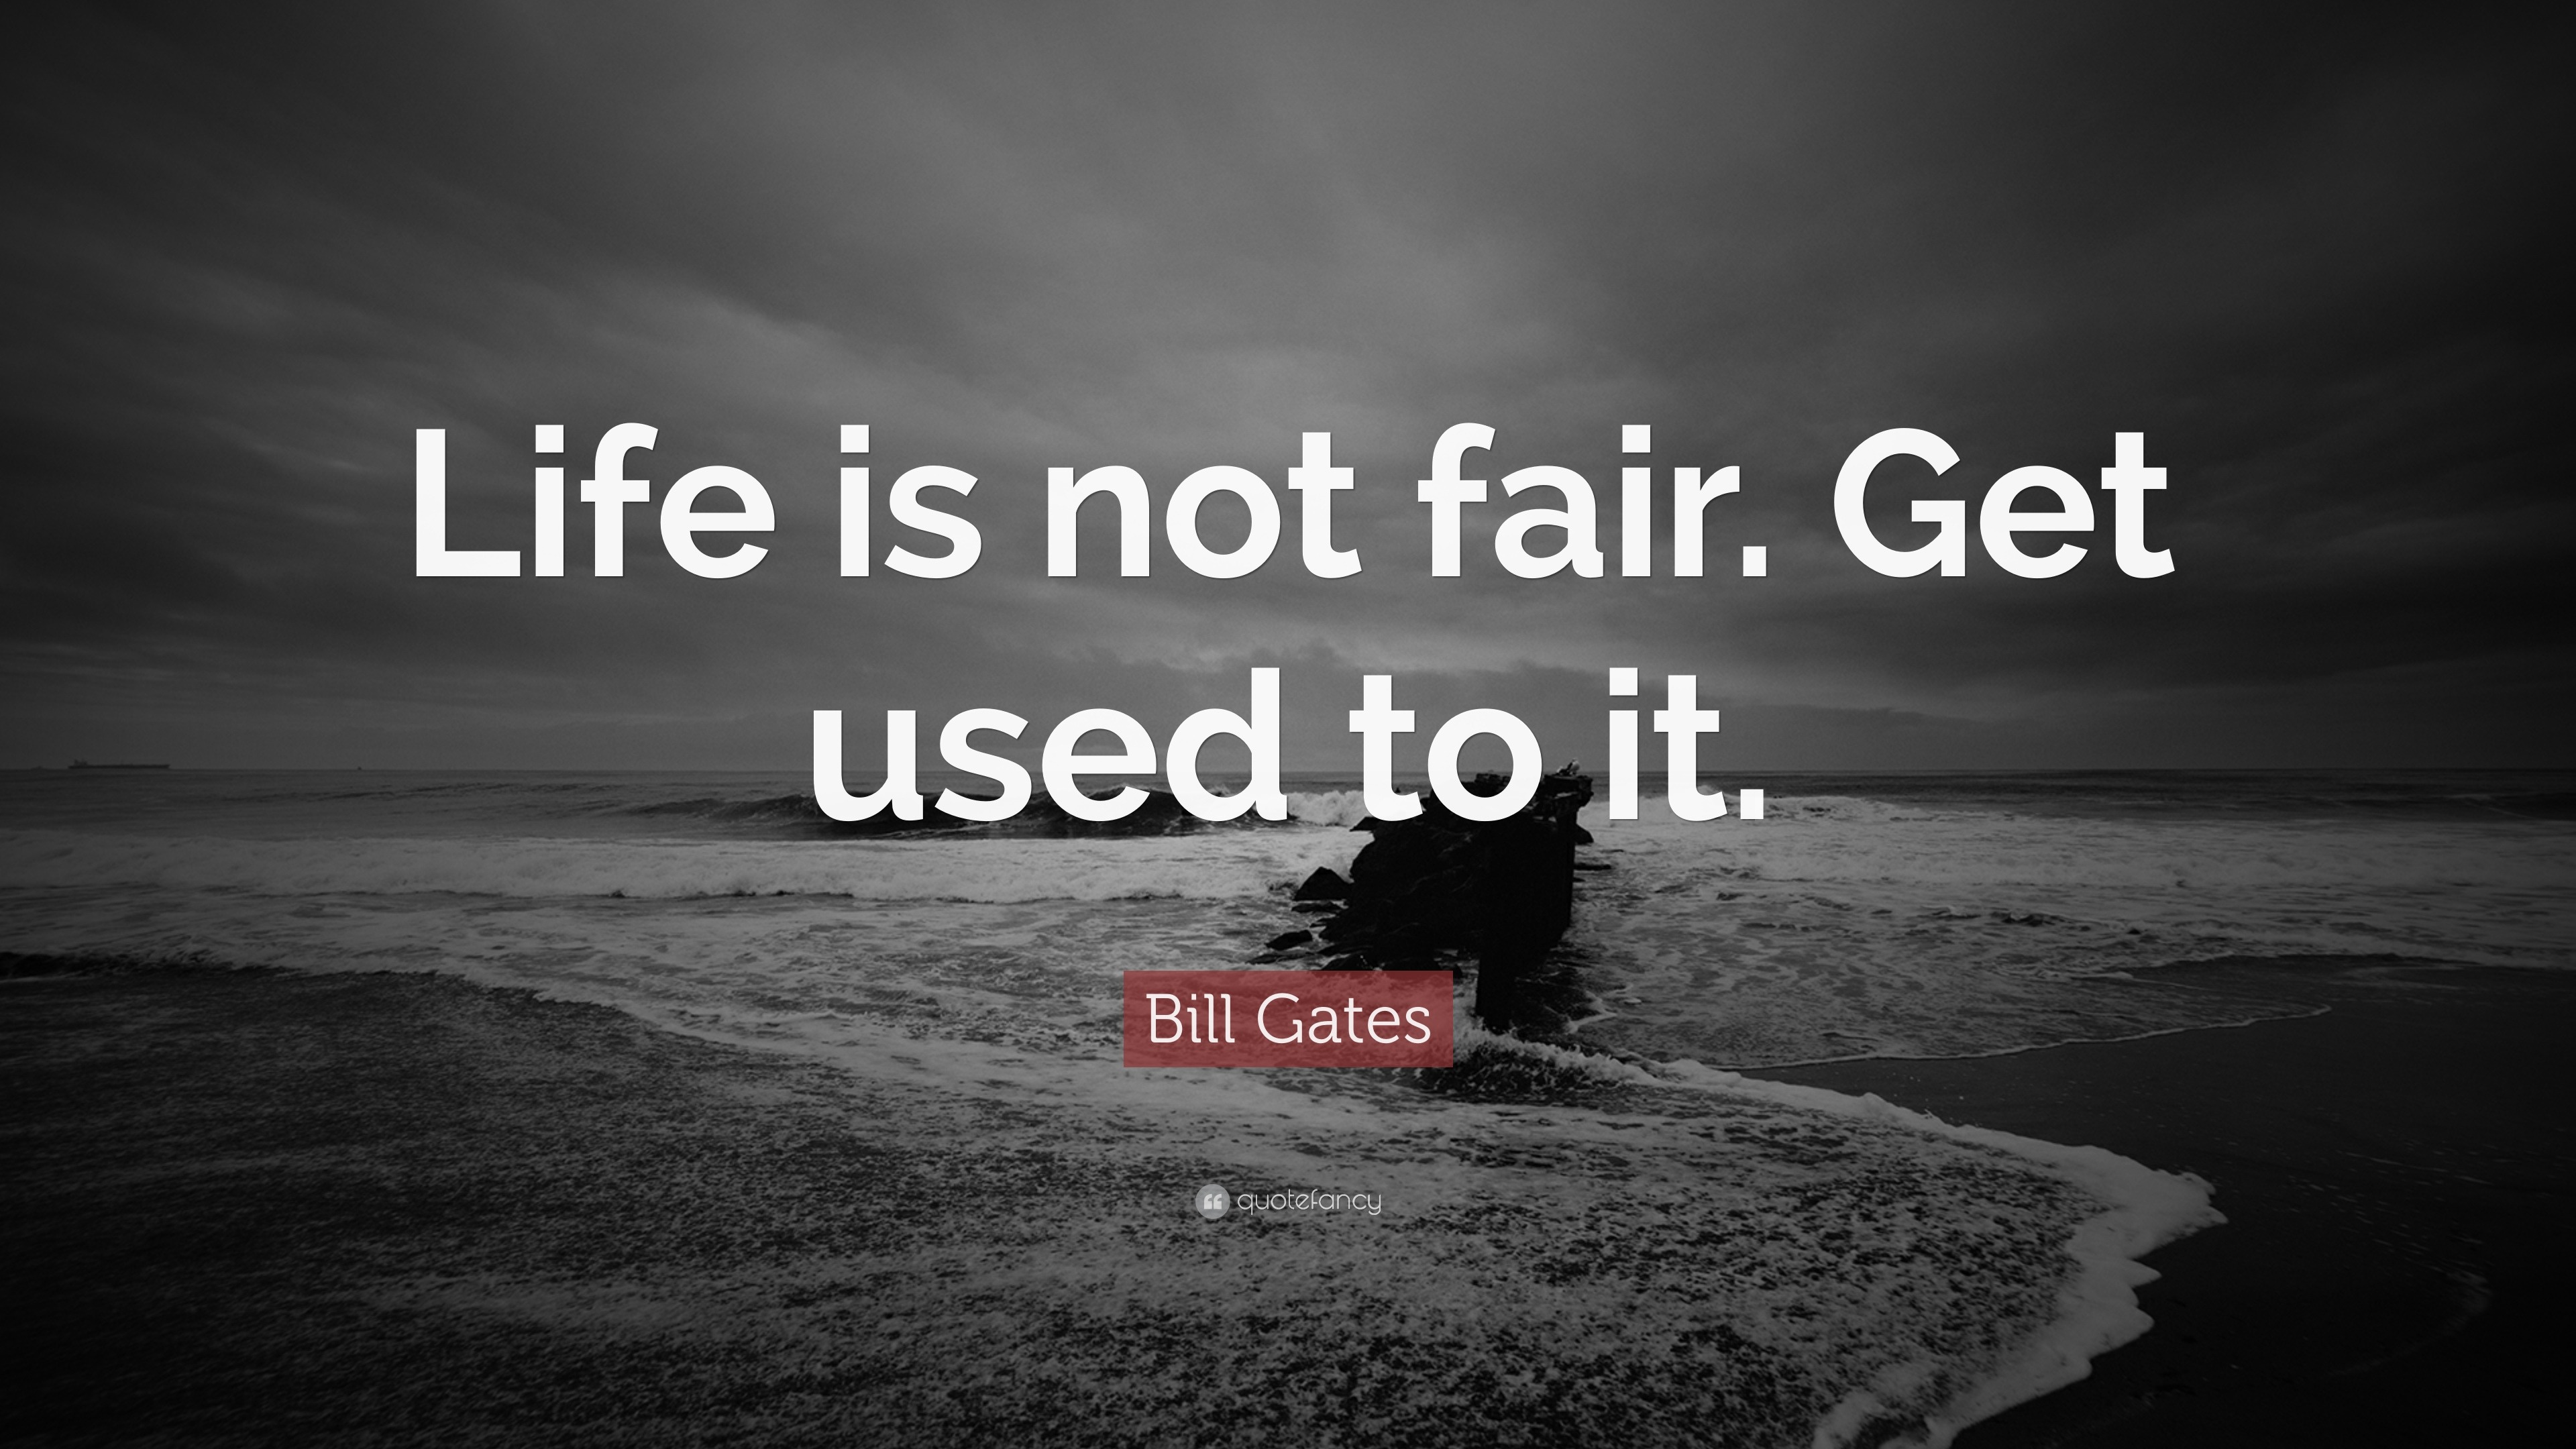 Bill Gates Quote “Life is not fair. Get used to it.” (19 wallpapers